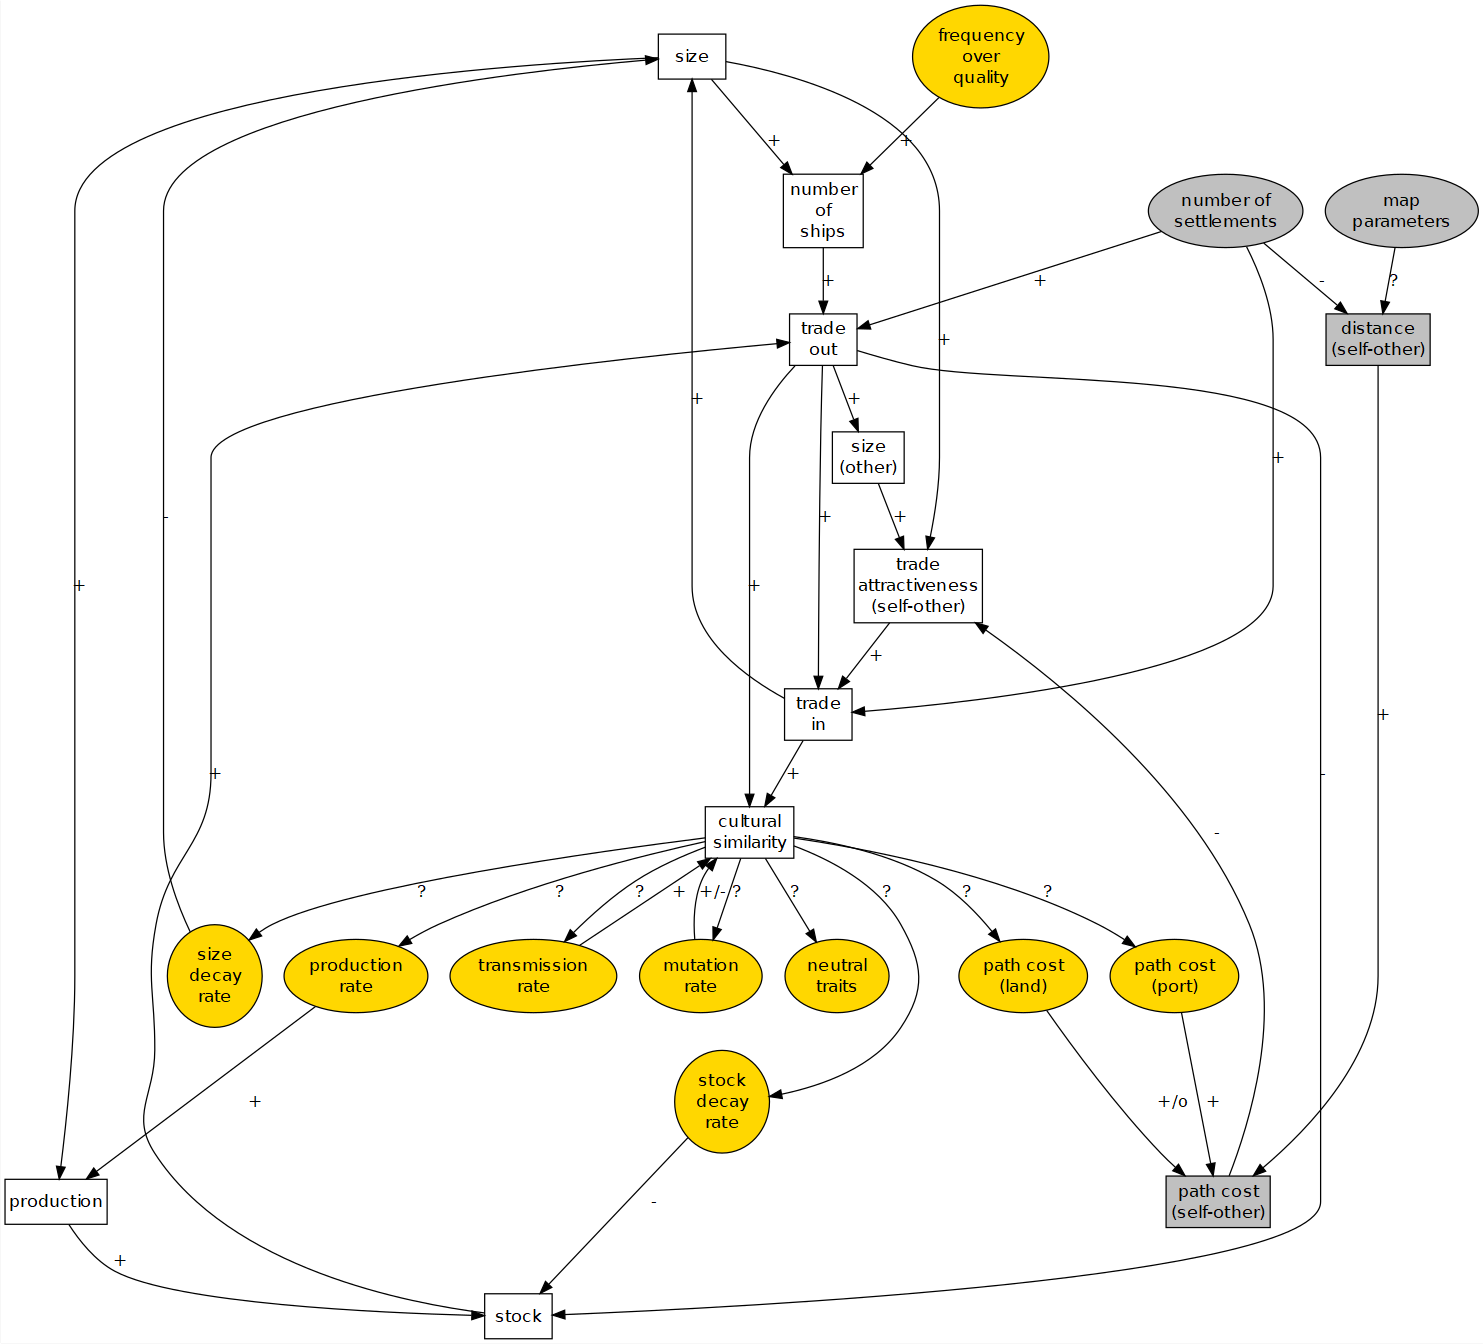 Pond Trade conceptual model in step 13. Ellipse nodes: global parameters; grey nodes: external variables in respect to a given settlement; yellow nodes: variables representing settlement trait.